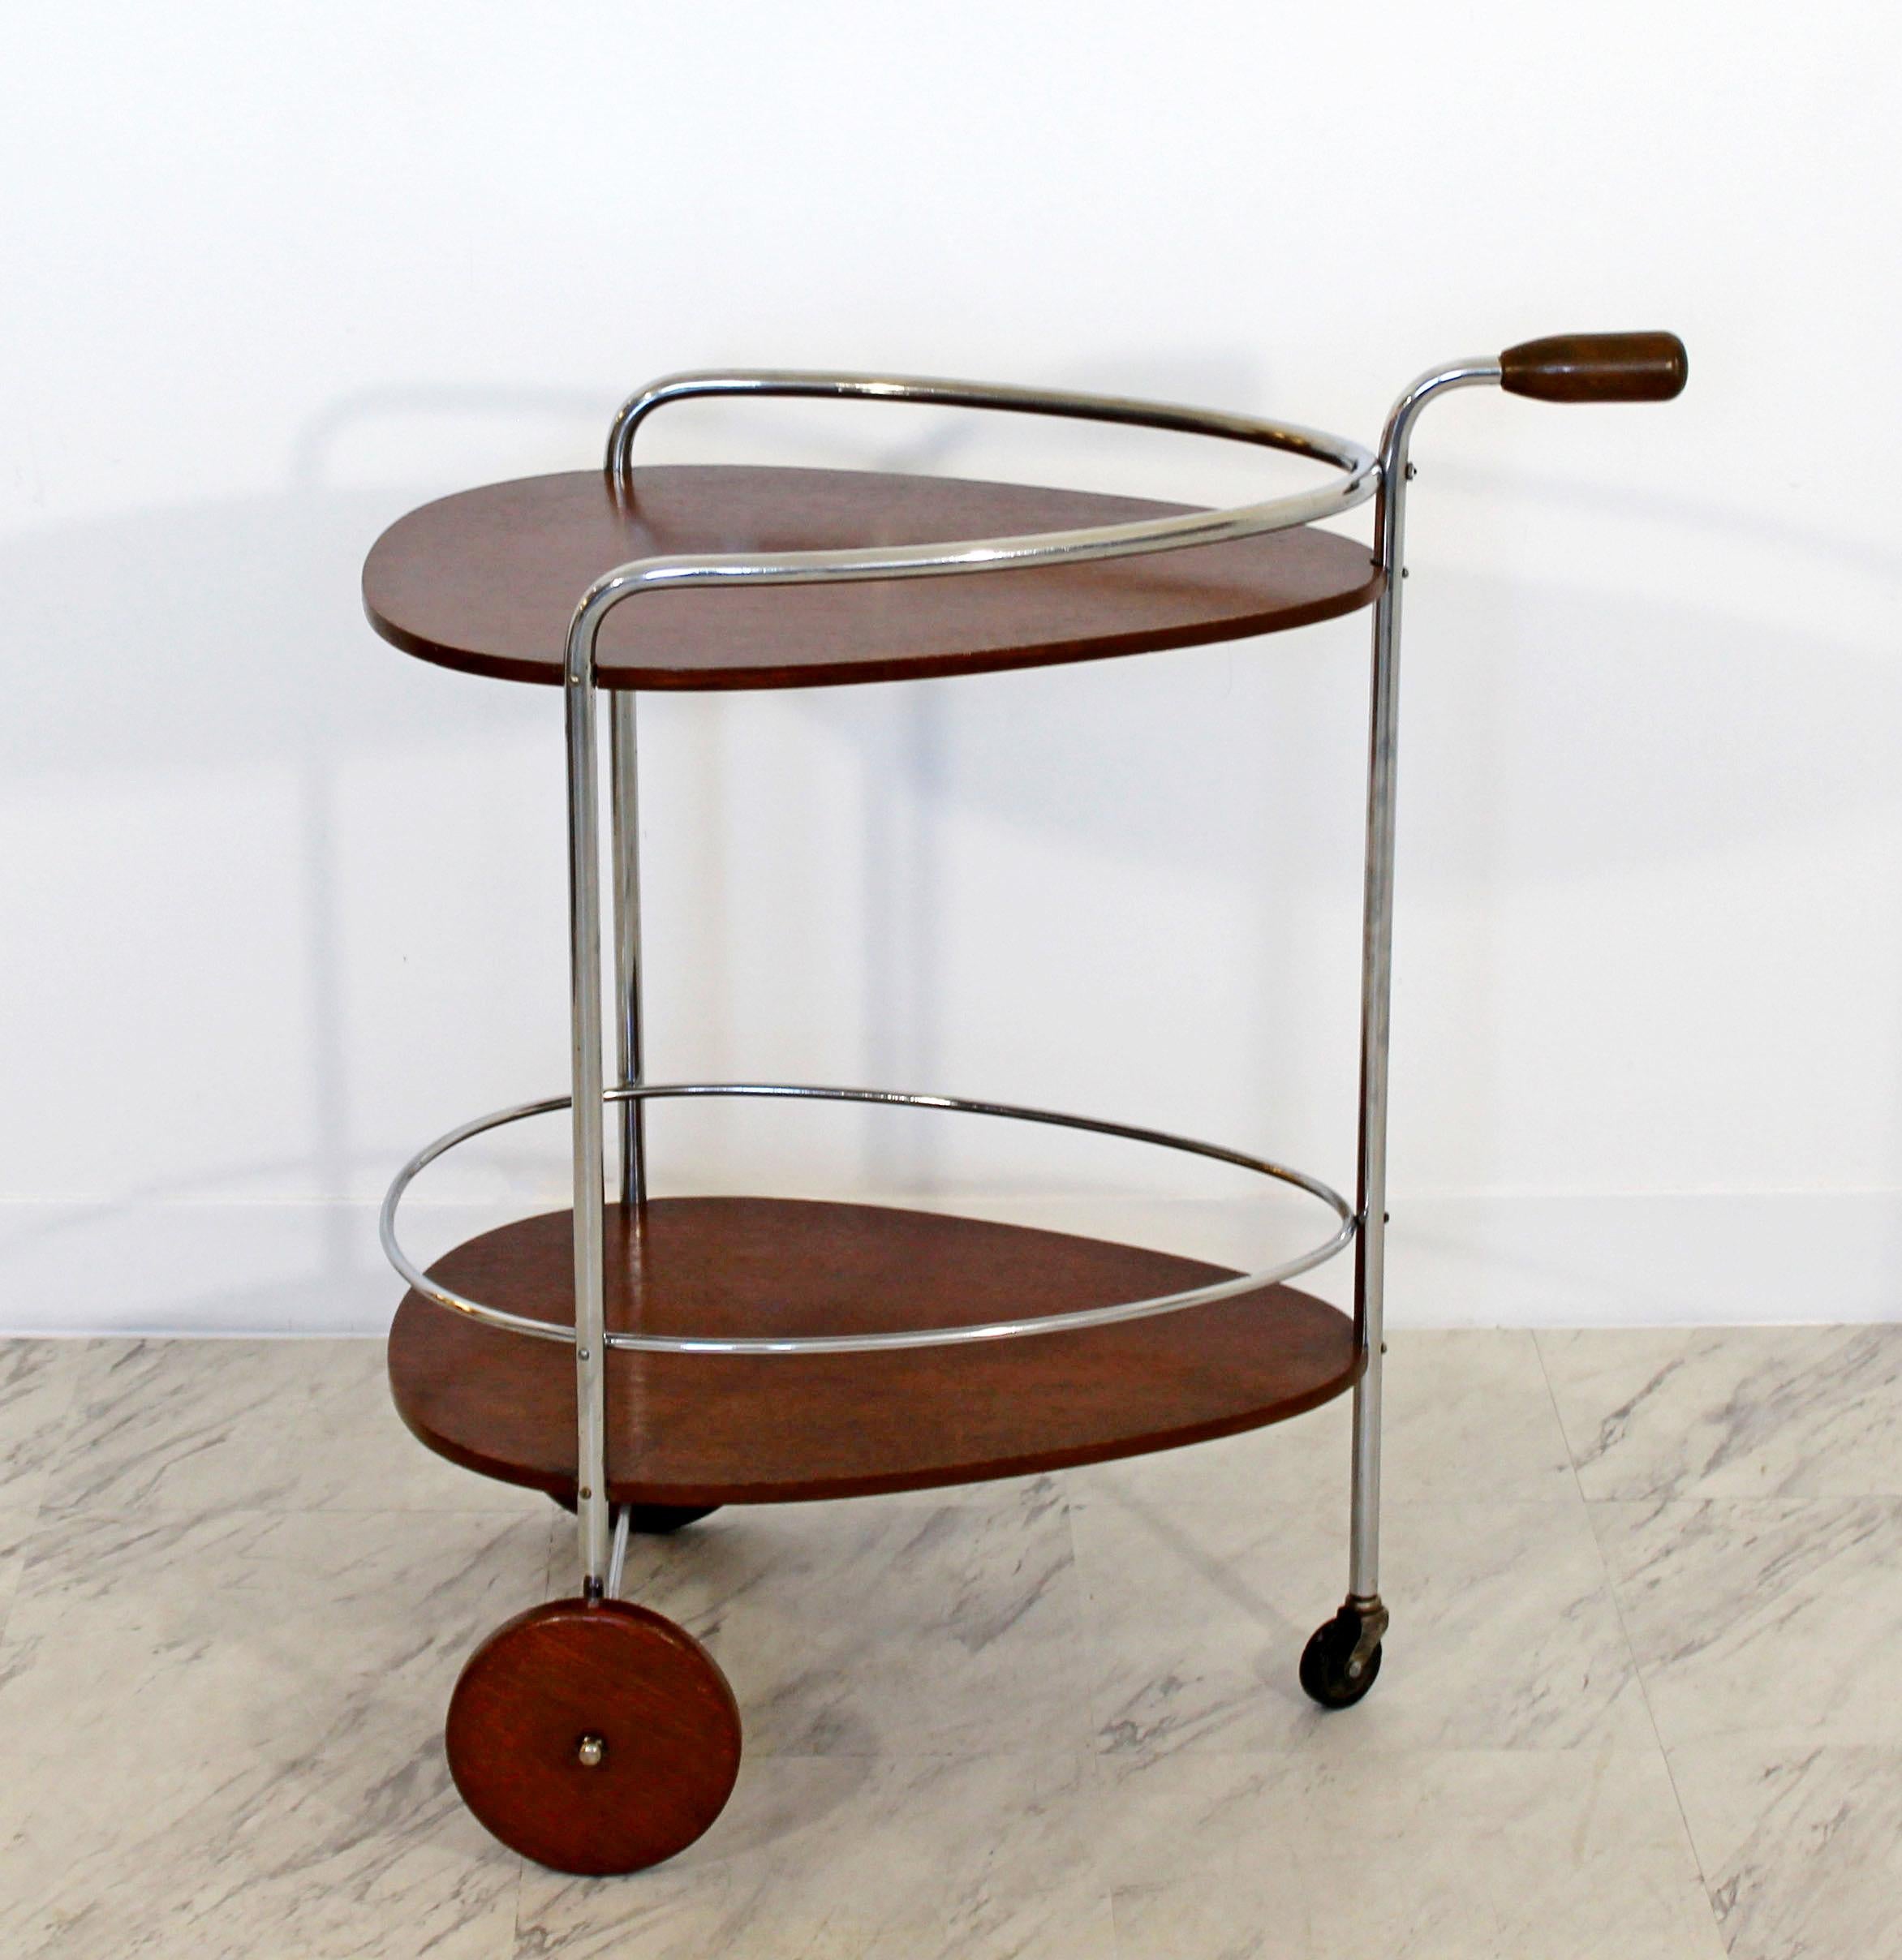 For your consideration is a phenomenal, two tiered bar or serving cart, made of wood and chrome, by Treitel Gratz, circa 1940s. In excellent condition. The dimensions are 26